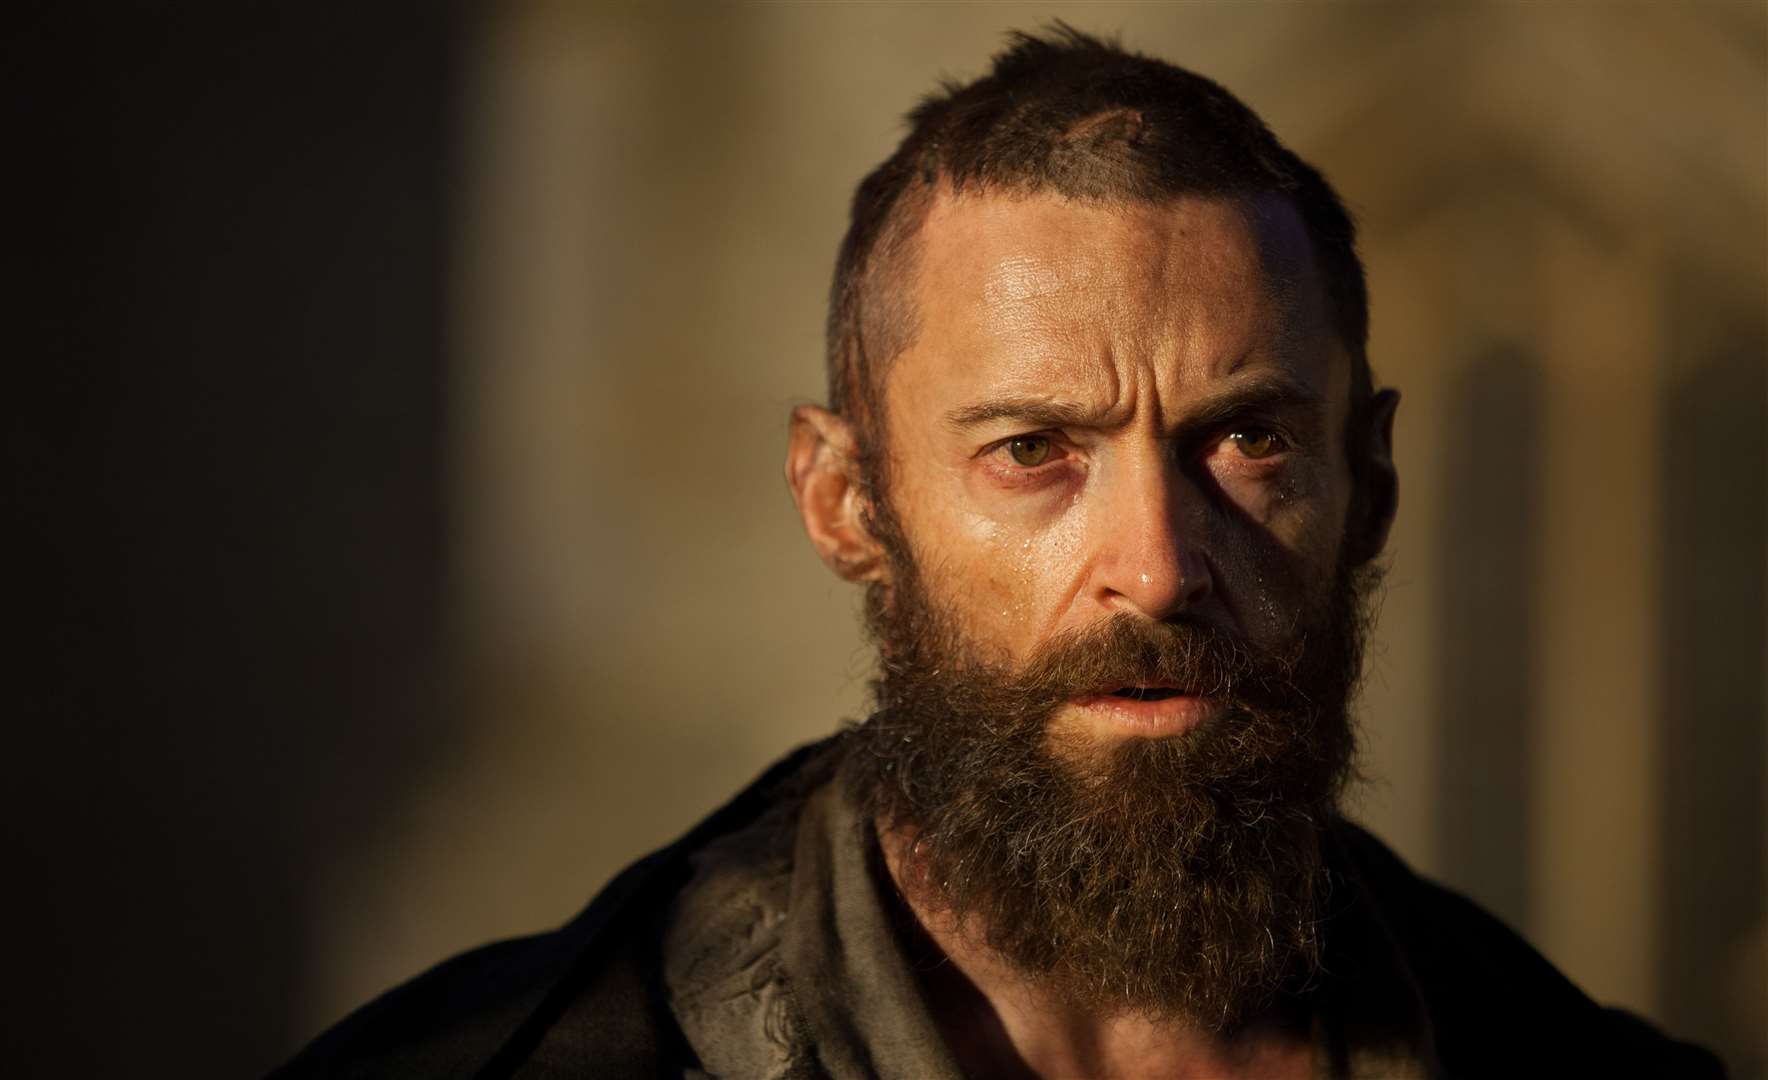 Hugh Jackman starring in the film version of Les Miserables